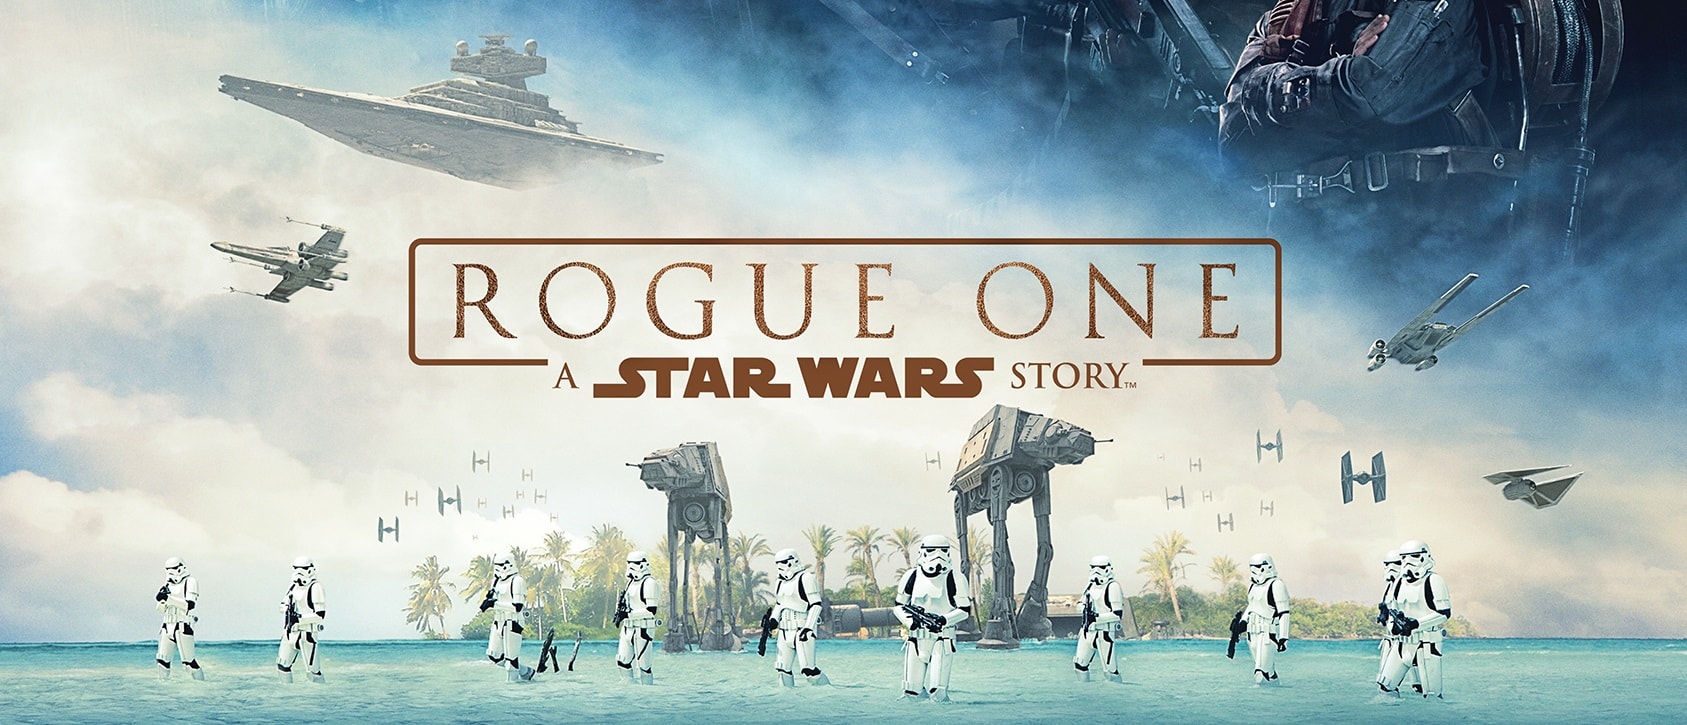 The Rogue One: A Star Wars Toy Story 4K 2016 big poster